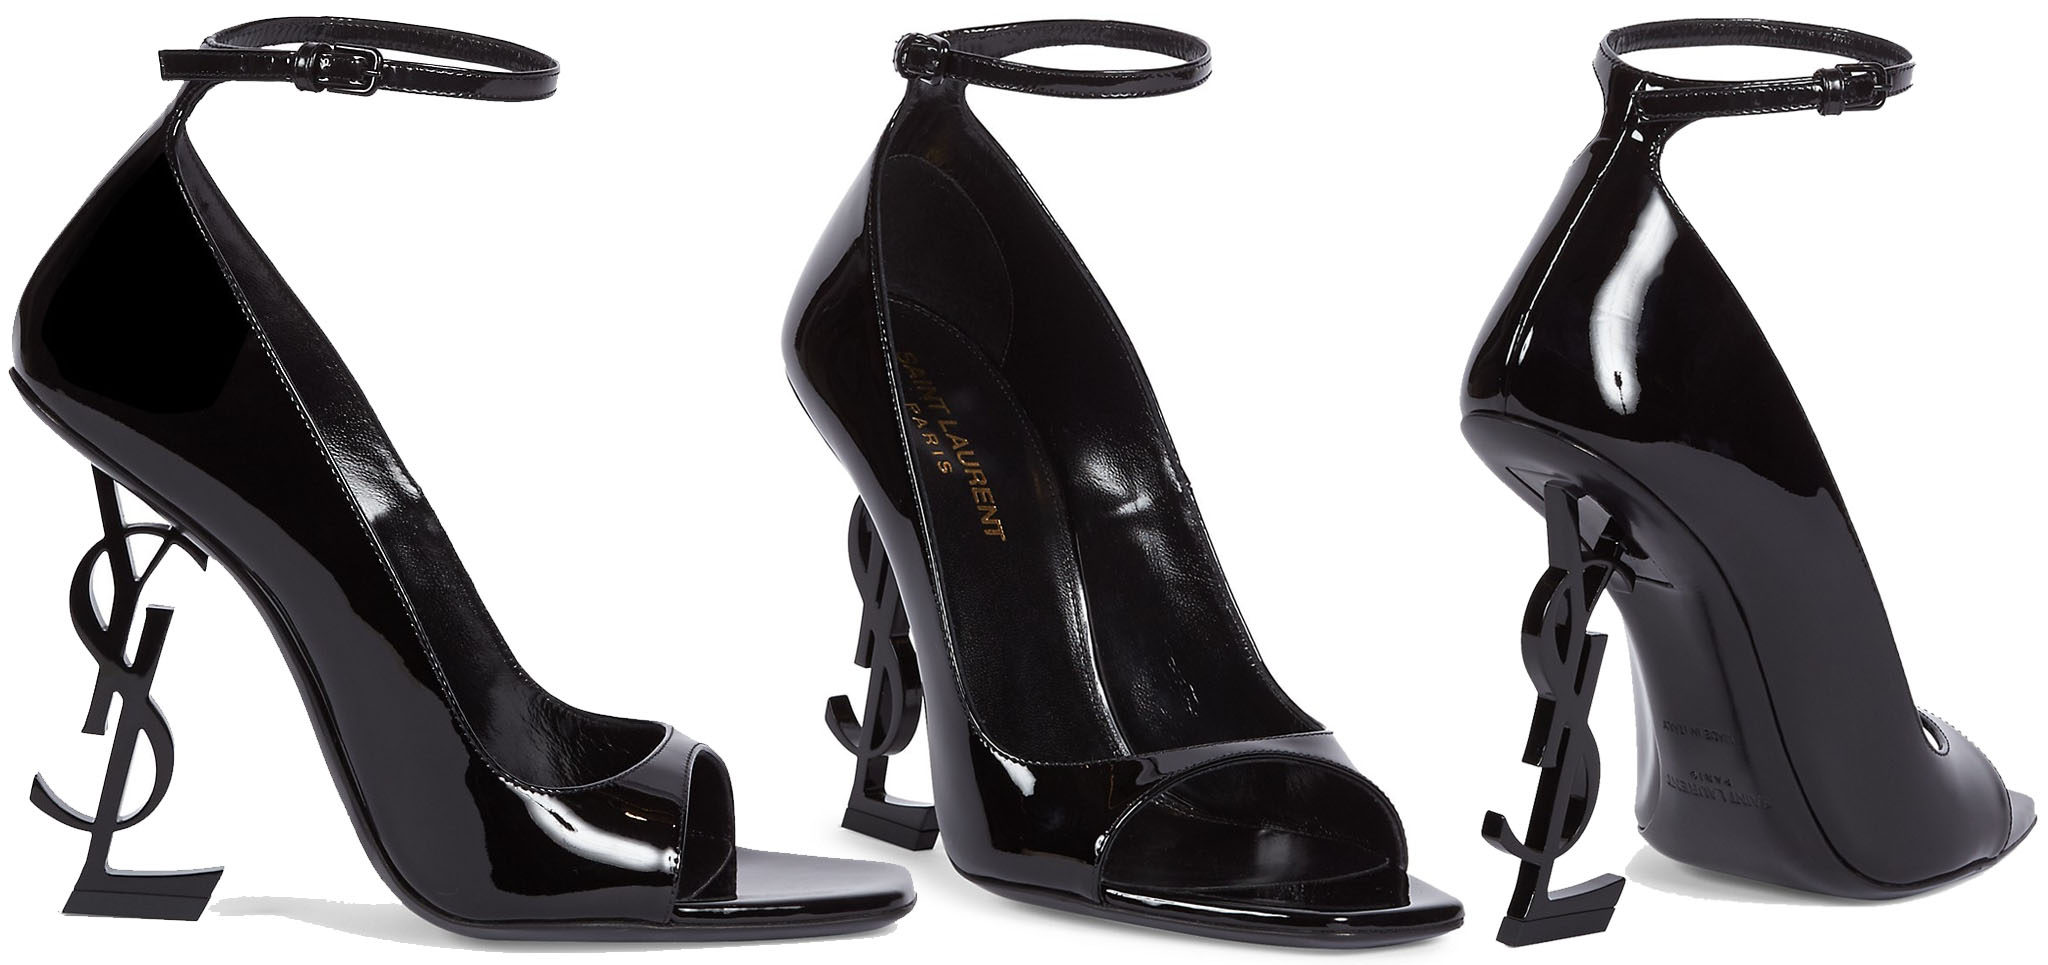 A classic pair of open-toe patent pumps adorned with a sculpted monogram YSL heel